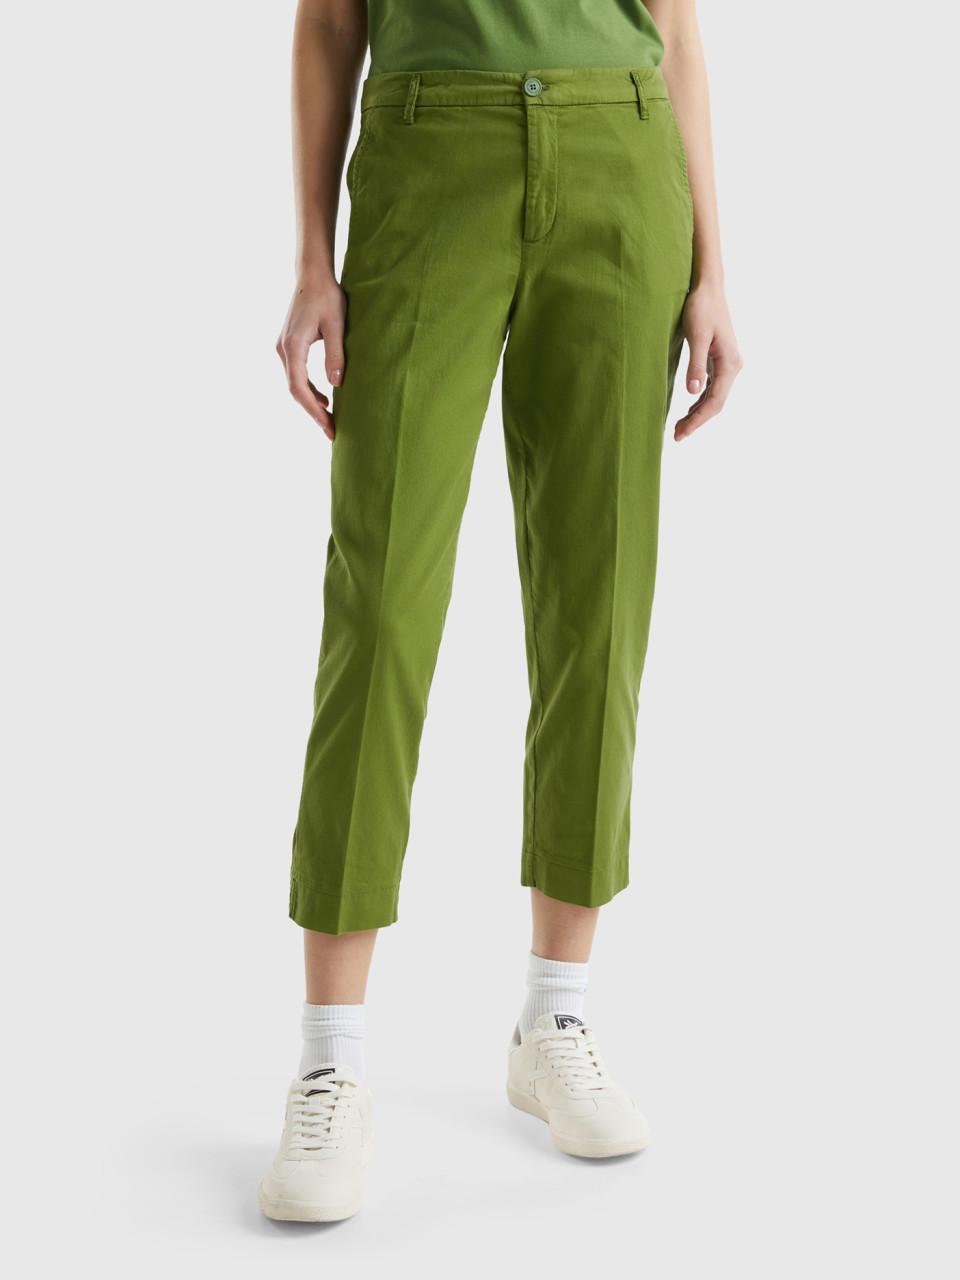 Benetton, Cropped Chinos In Stretch Cotton, Military Green, Women